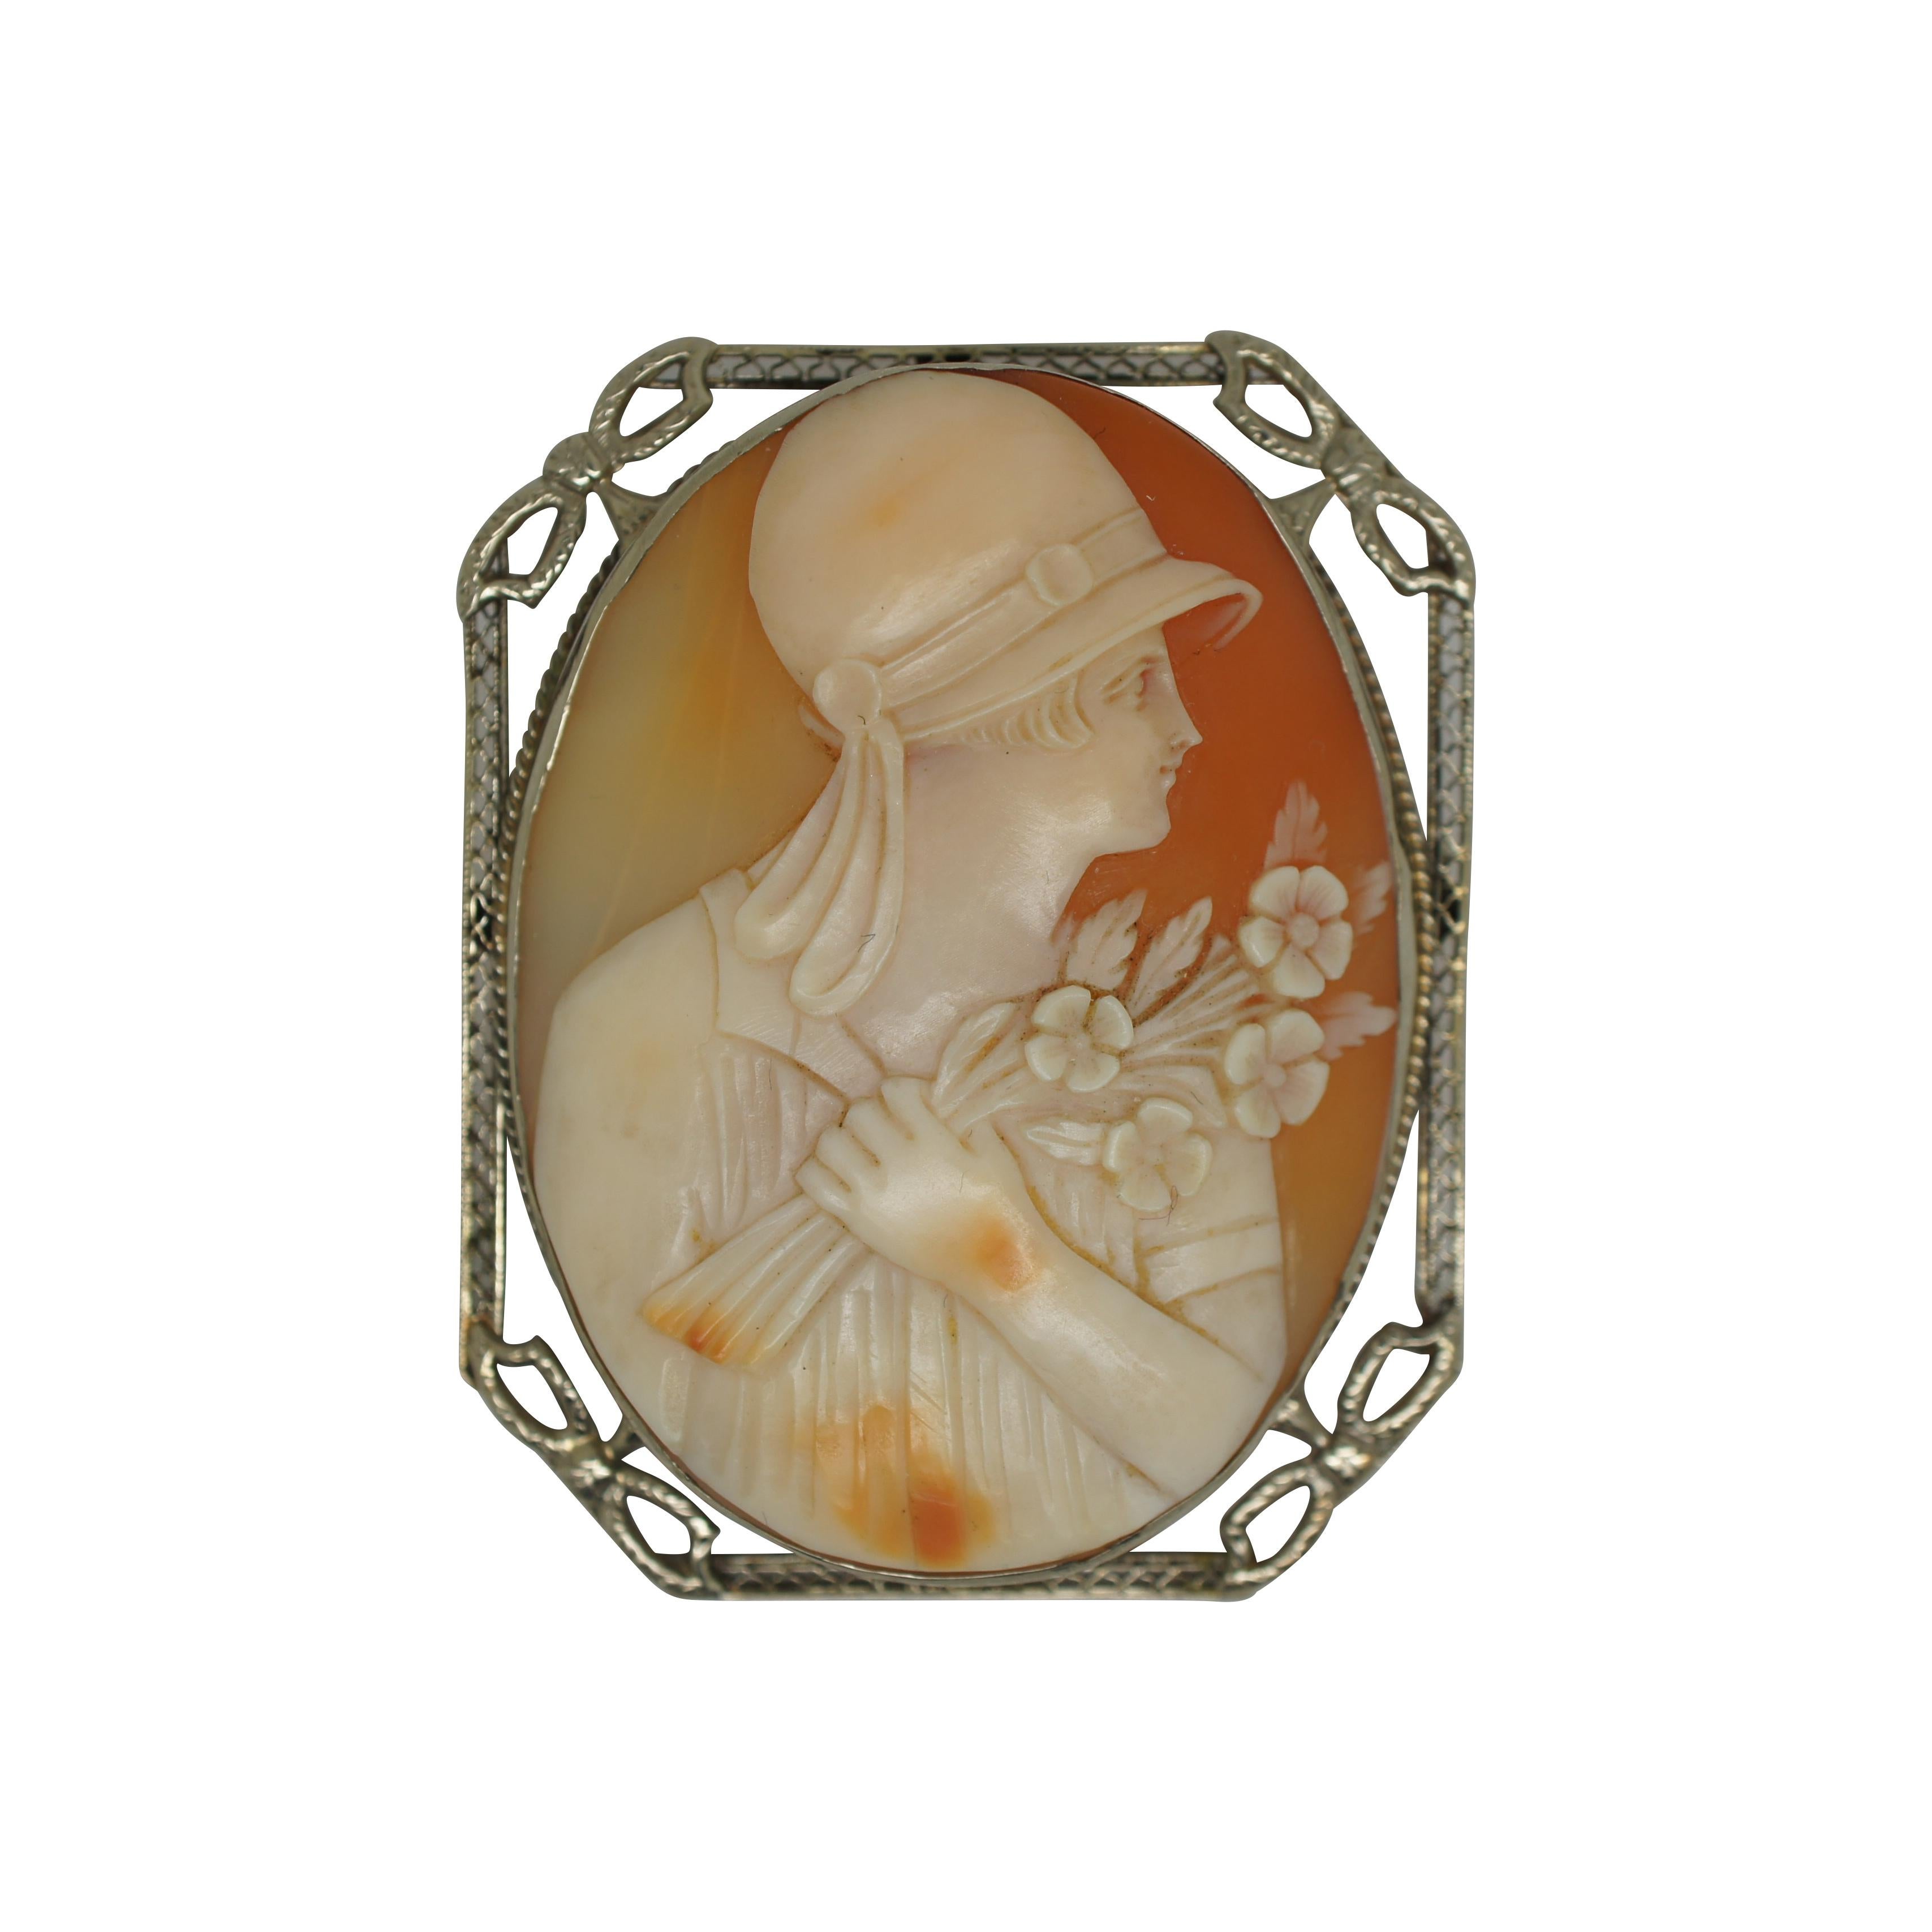 Lot of three antique late 19th to early 20th century hand carved shell cameos. Stunning large 14k gold oval cameo showing a woman in flapper / 1920’s attire holding a bouquet of flowers, set in a rectangular frame with filigree and bow shaped